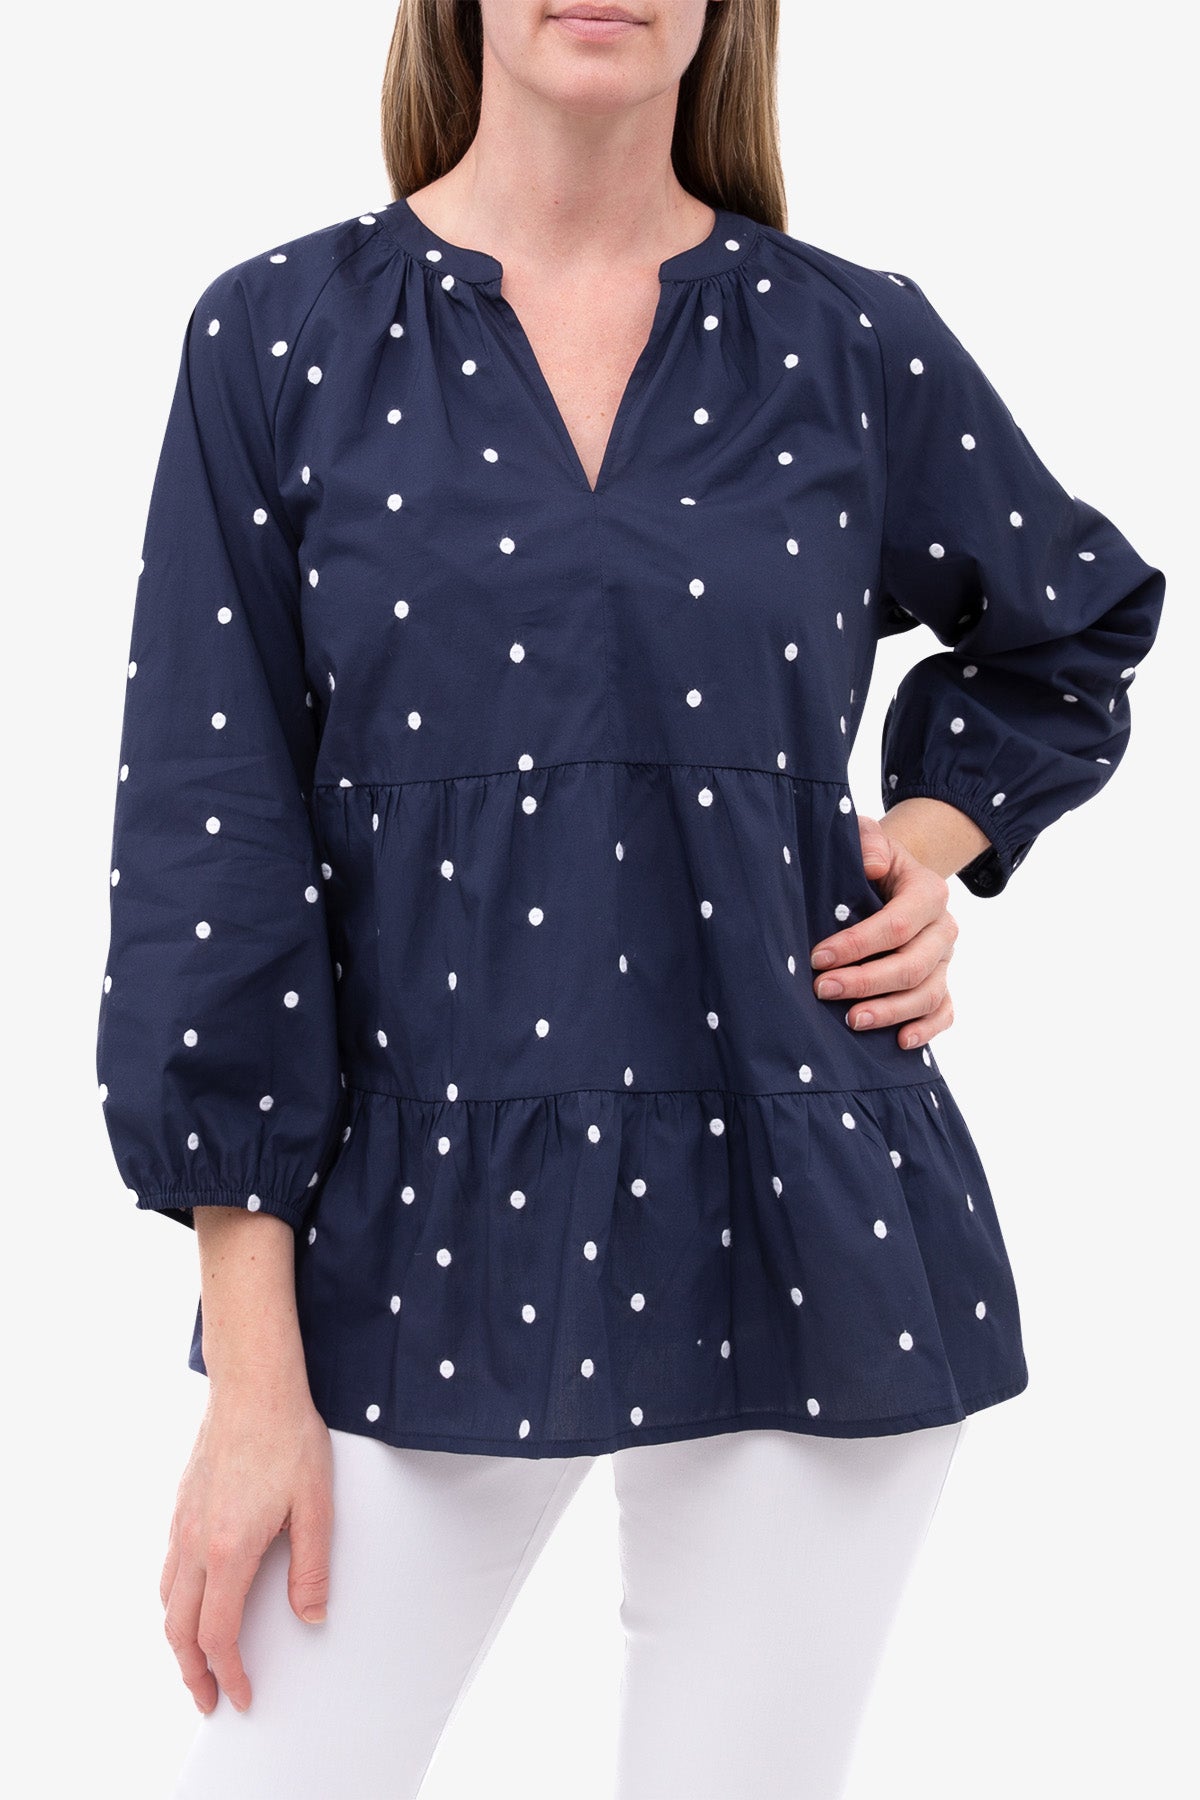 Embroided Spot Tiered Top Navy and White